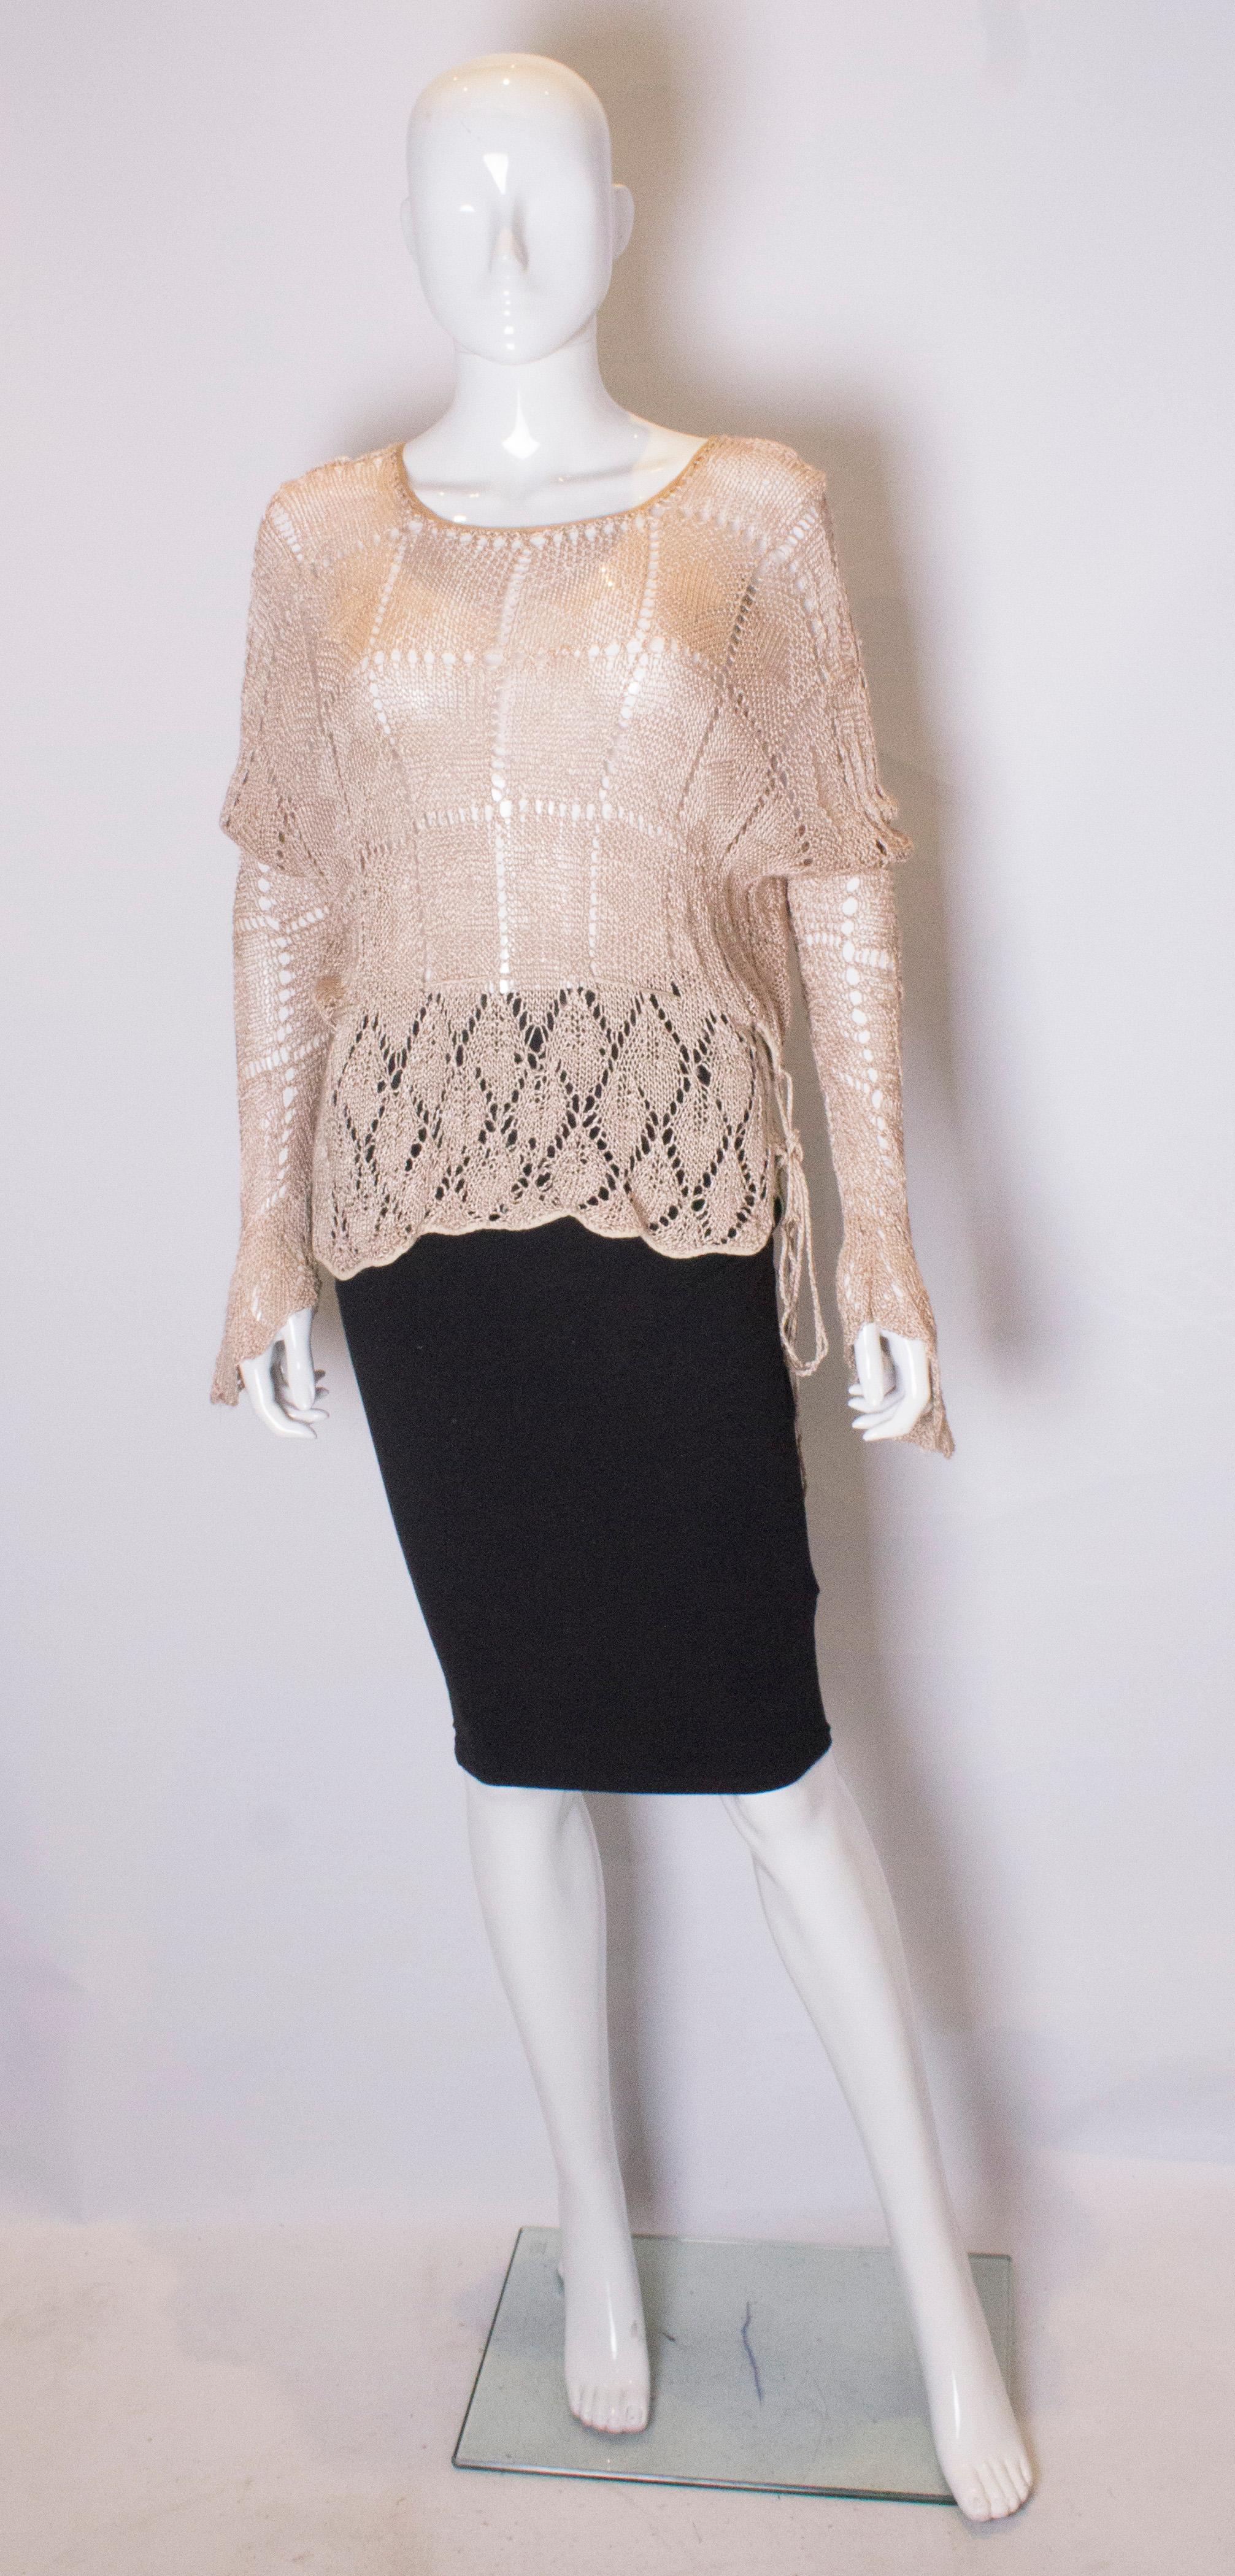 A stunning knit from the 1920s. This  beautiful jumper has a drawstring waist, round neckline and scalloped cuffs.
Measurements: bust up  to 38'',length 23''
